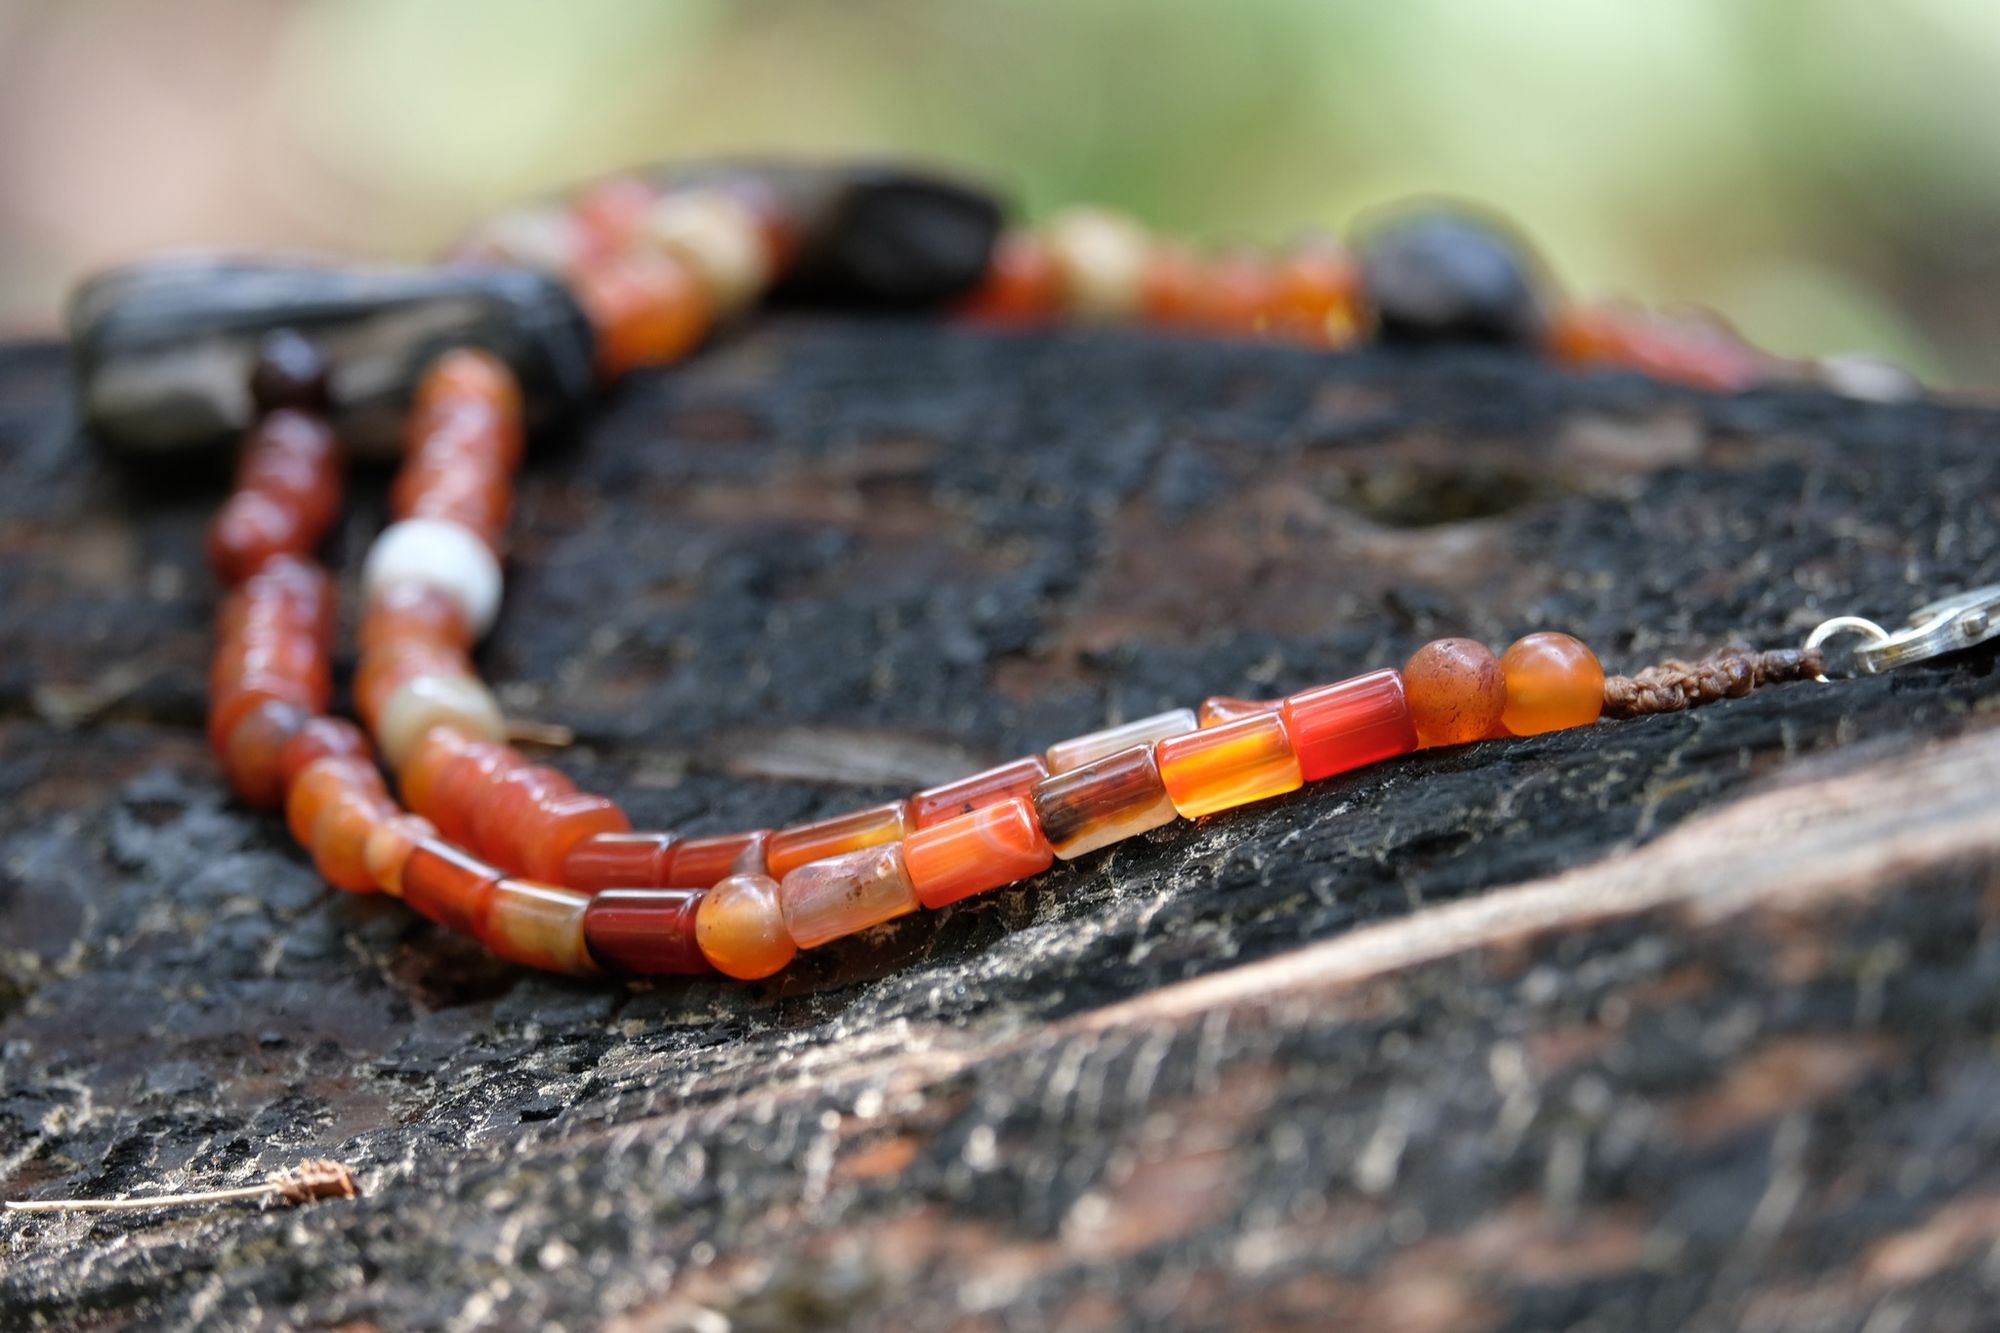 Detail of dark petrified wood, tan fossilized coral and red orange carnelian necklace on a burned log